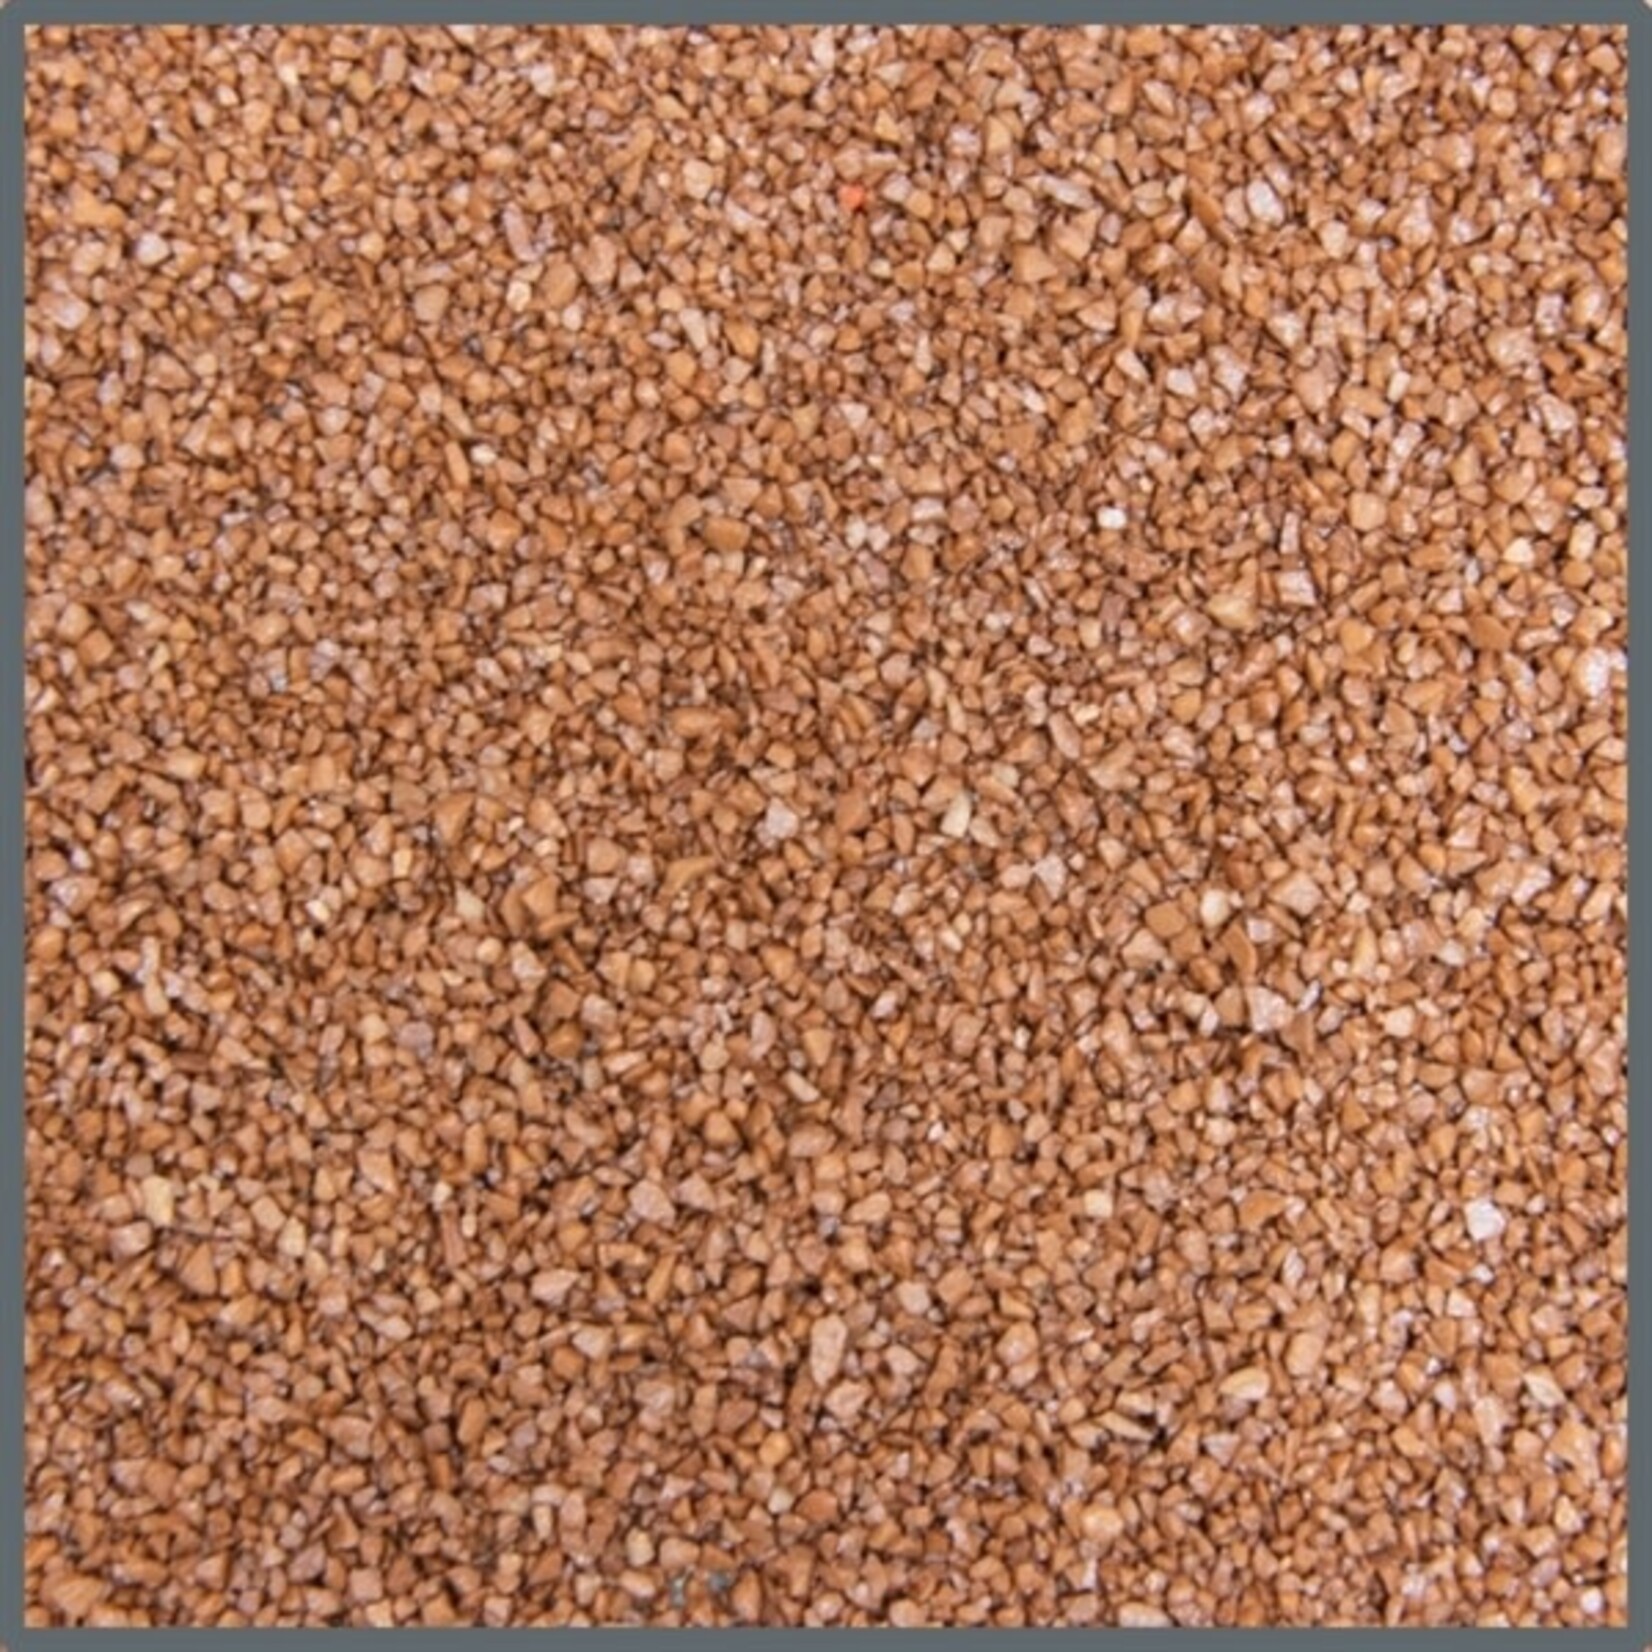 Dupla Ground colour brown earth 0.5-1.4 mm 5 kg